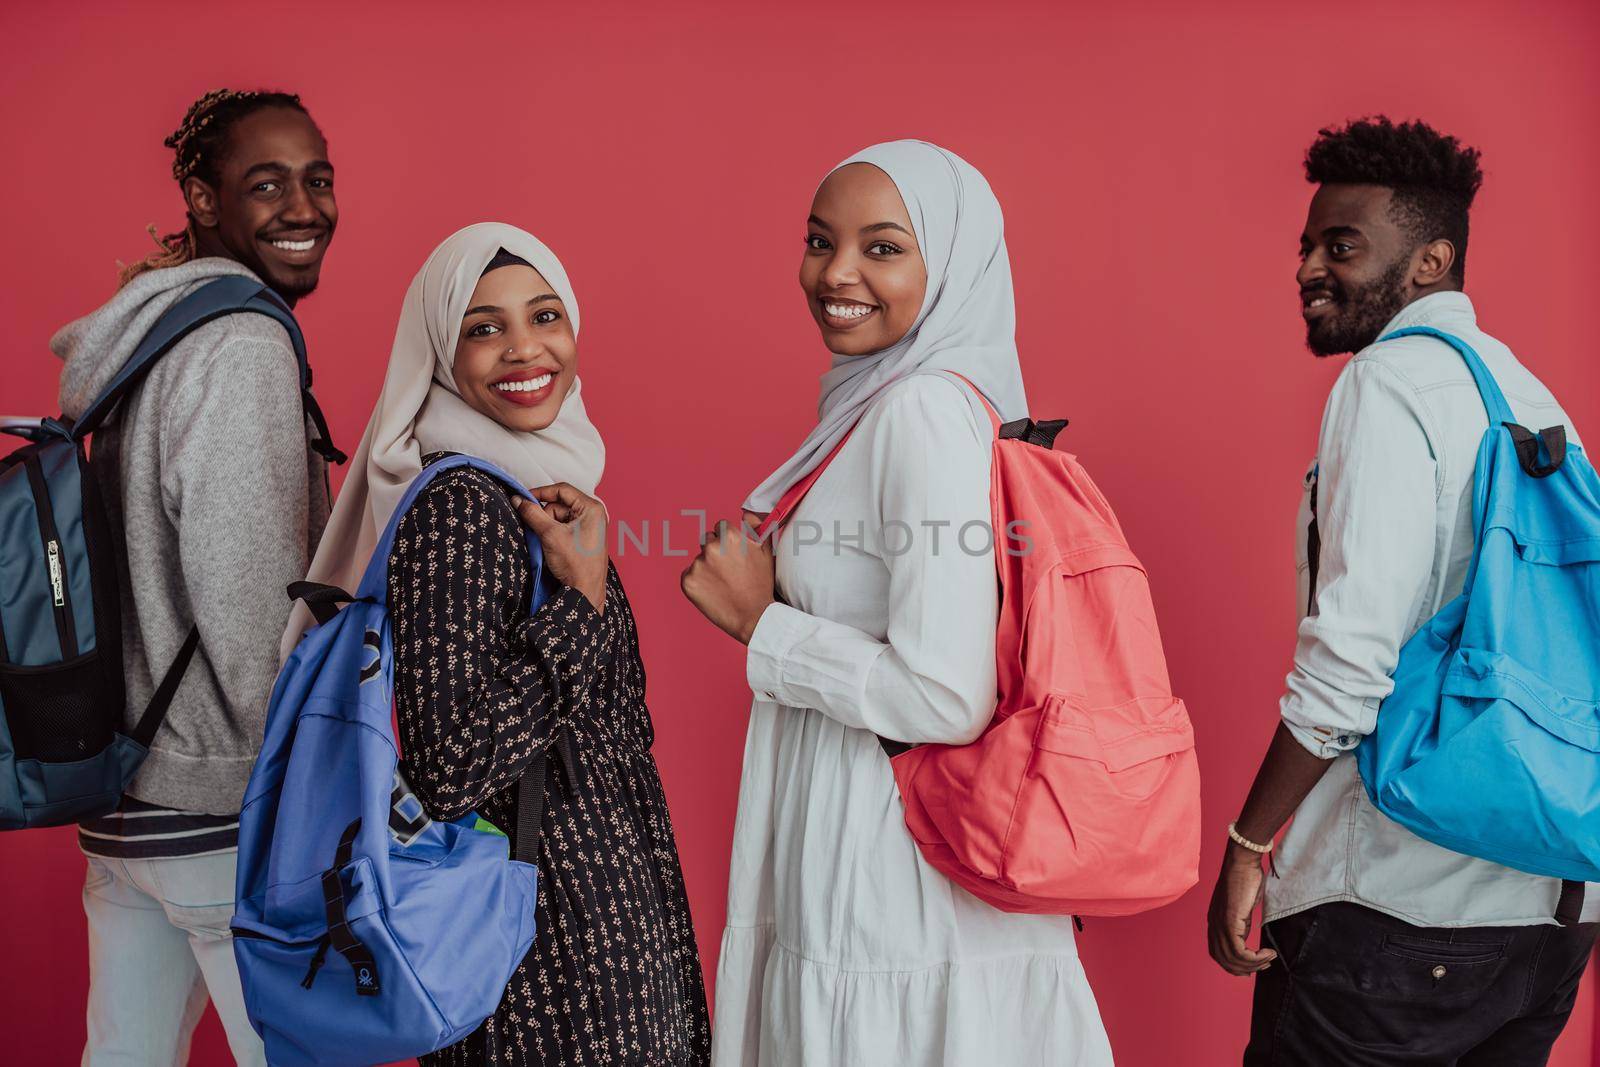 A group of African Muslim students with backpacks posing on a pink background. the concept of school education. High-quality photo